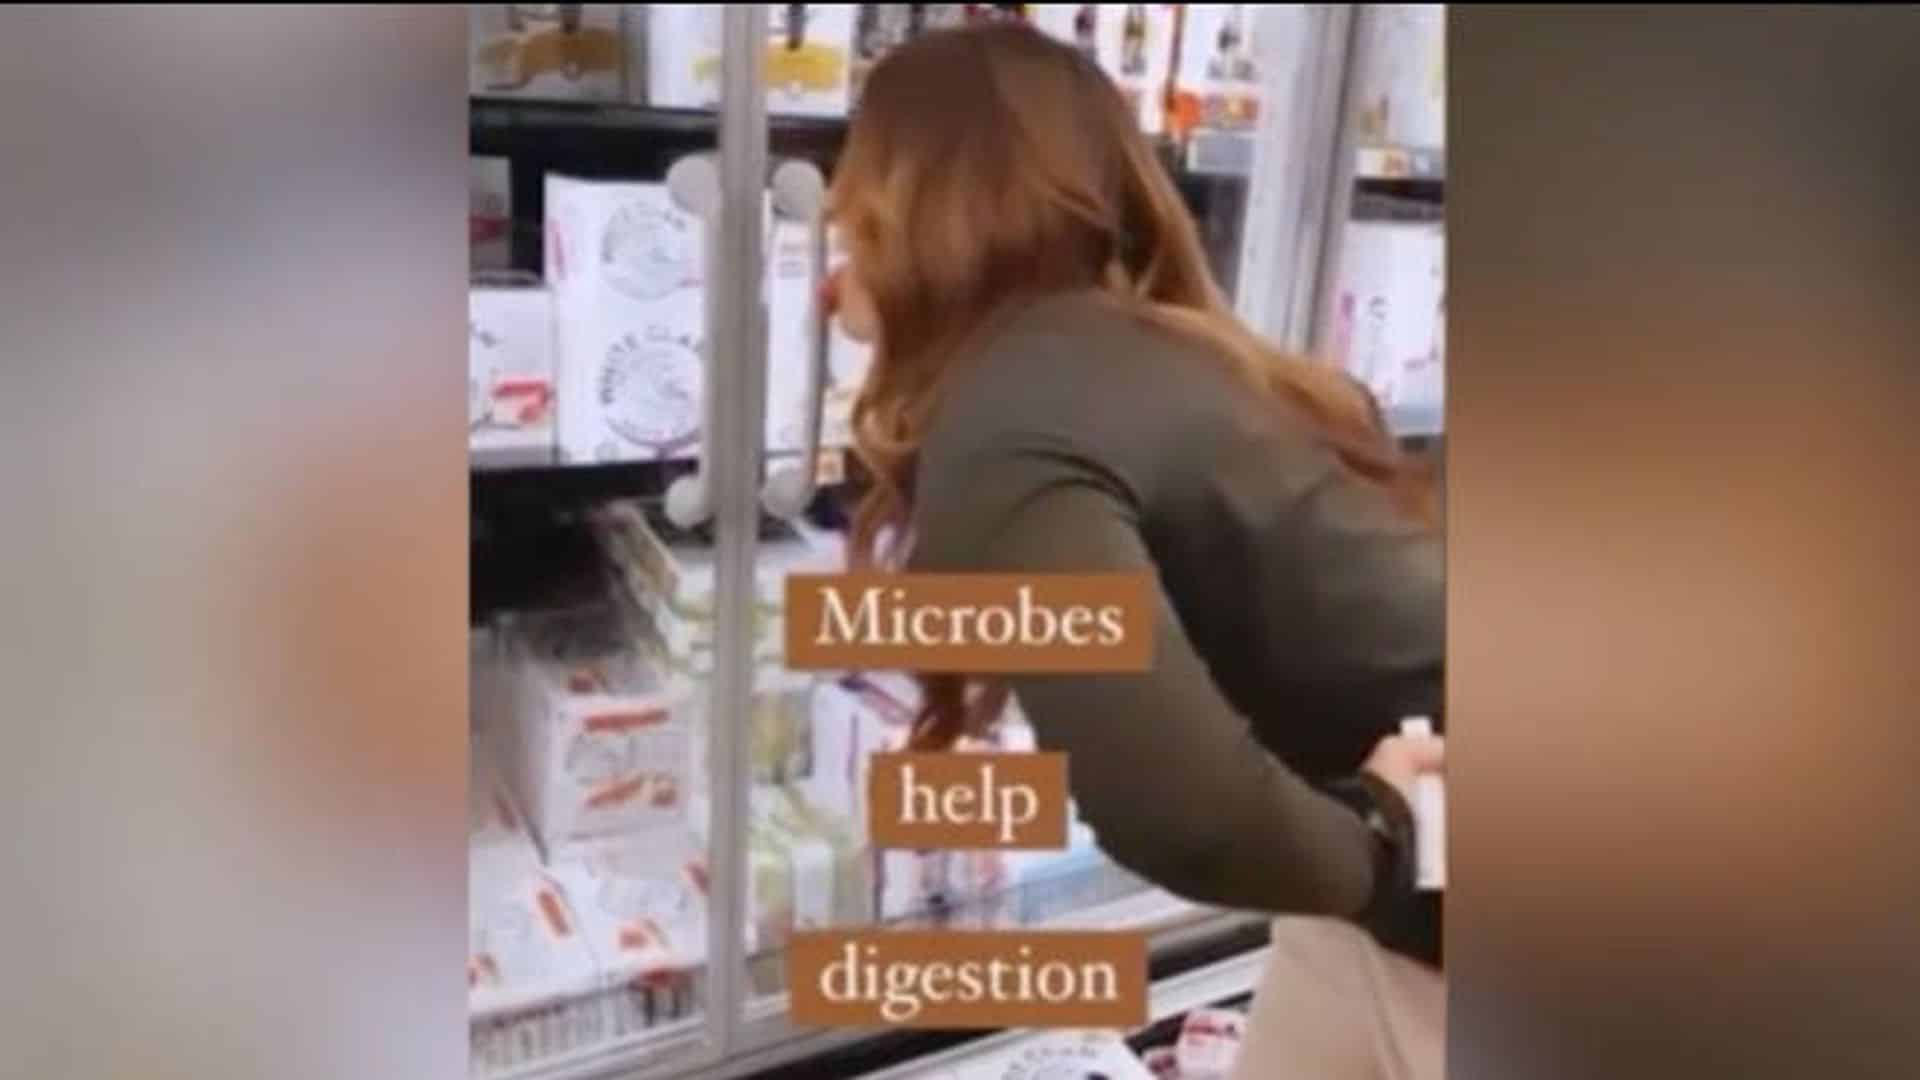 Jodie Meschuk licking the store clean